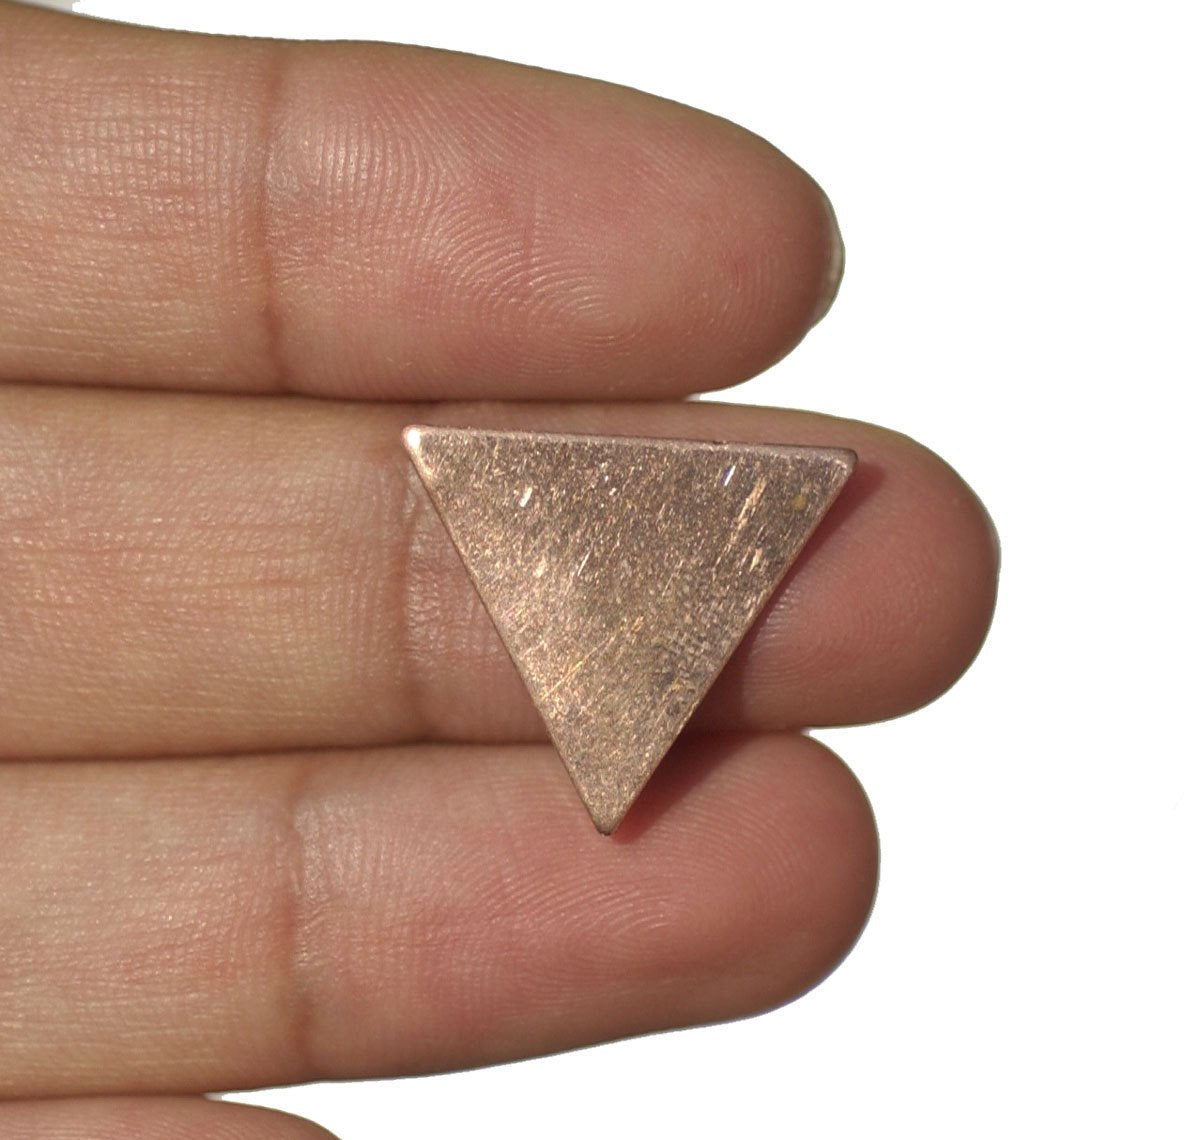 Blank Triangle in Lotus Flowers 20mm for Enameling Stamping Texturing Soldering Blanks Variety of Metals - 5 pieces